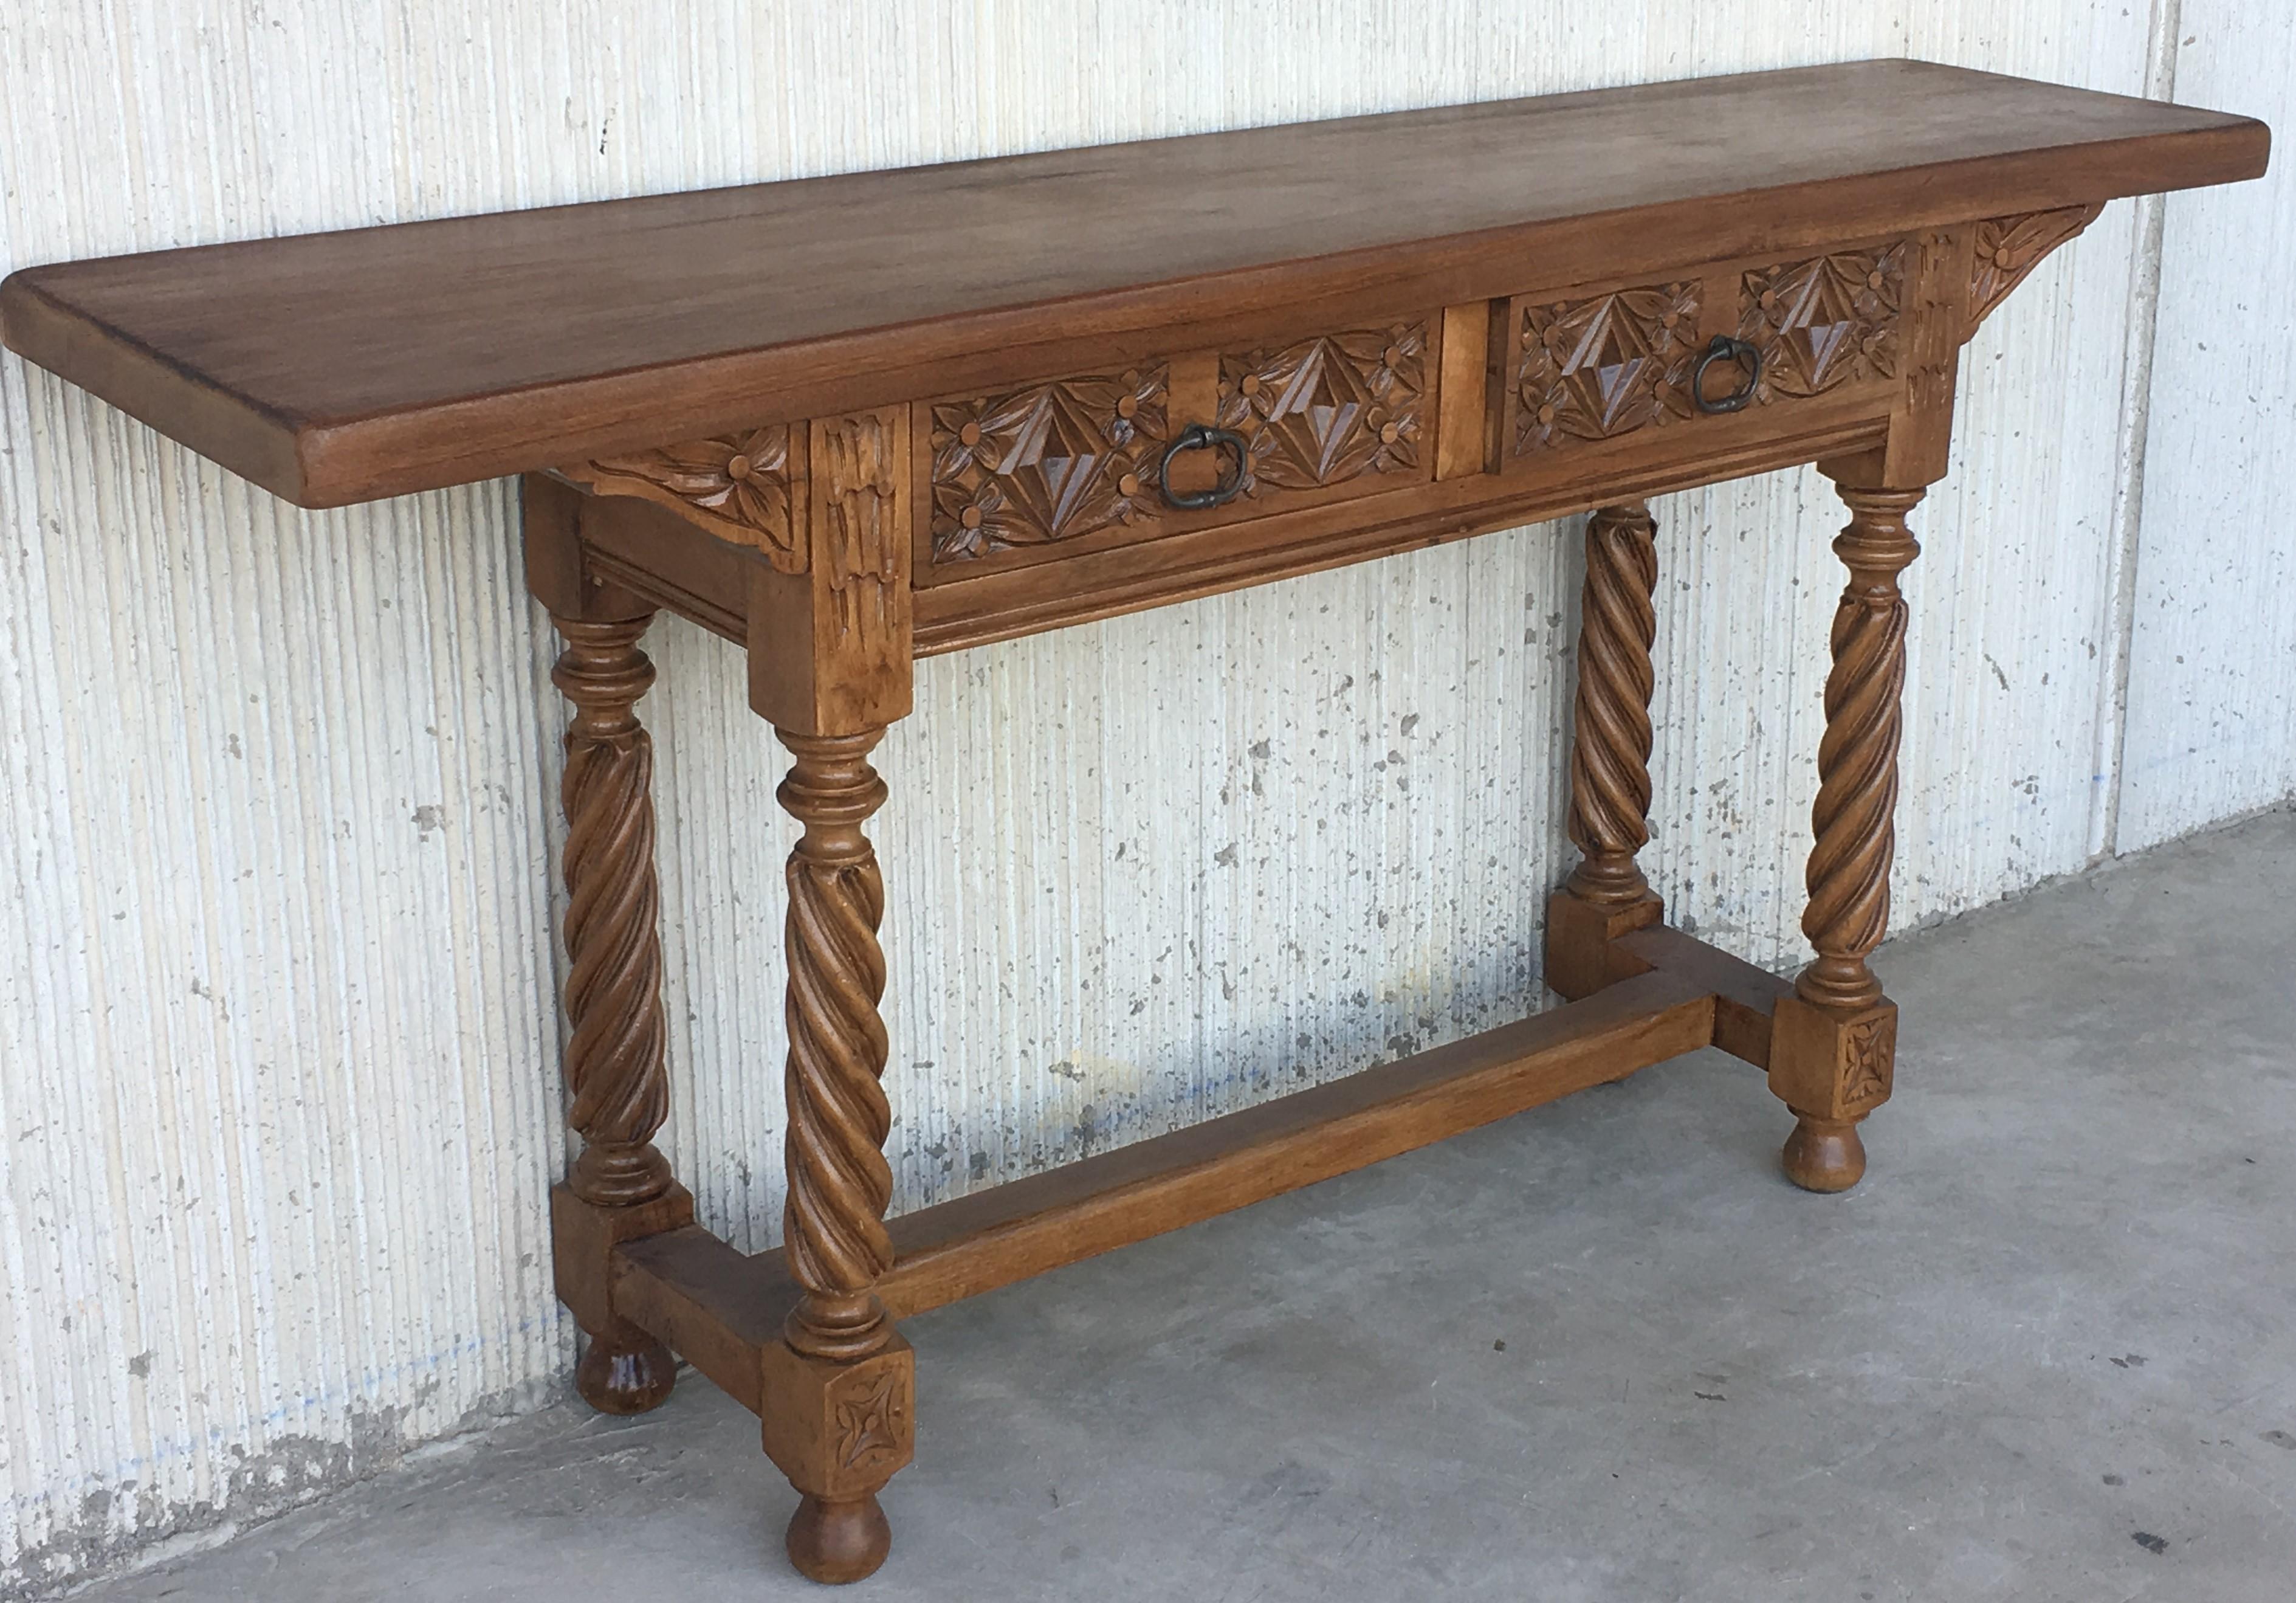 Baroque 18th Century Spanish Catalan Carved Console Table with Two Drawers